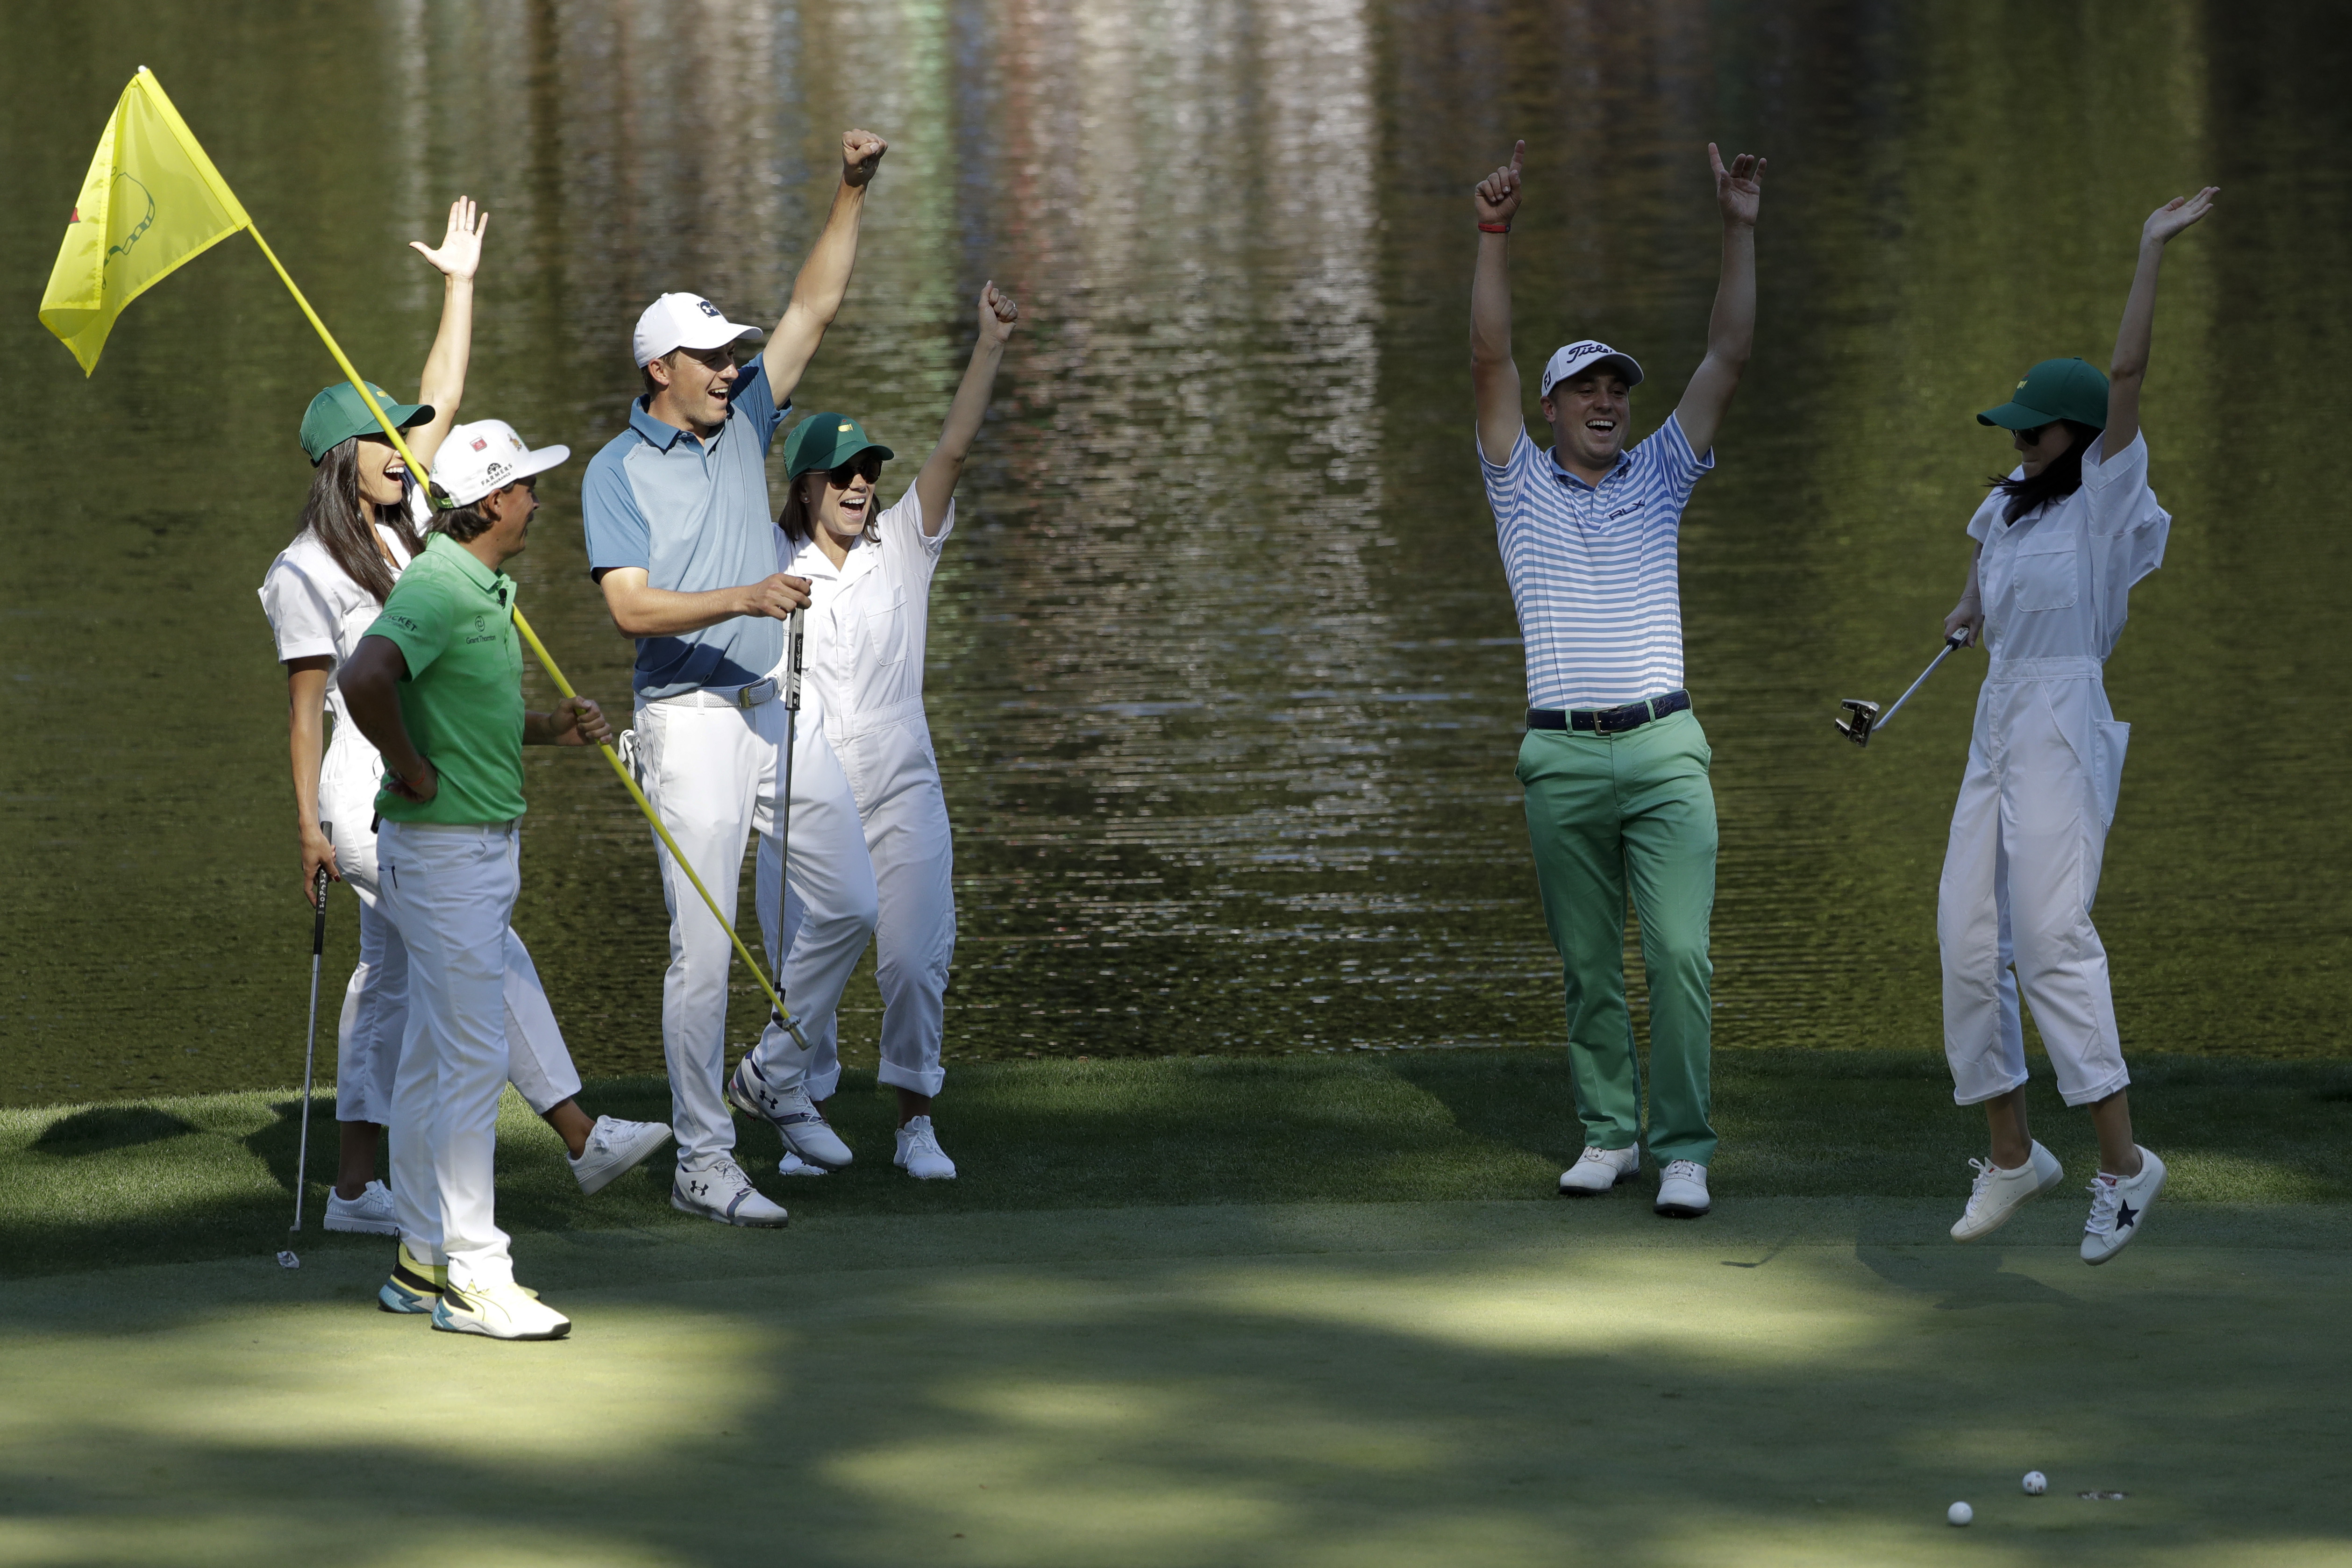 2022 Masters Par 3 contest Free Live Stream (4/6/22) How to watch, TV channel, time and more